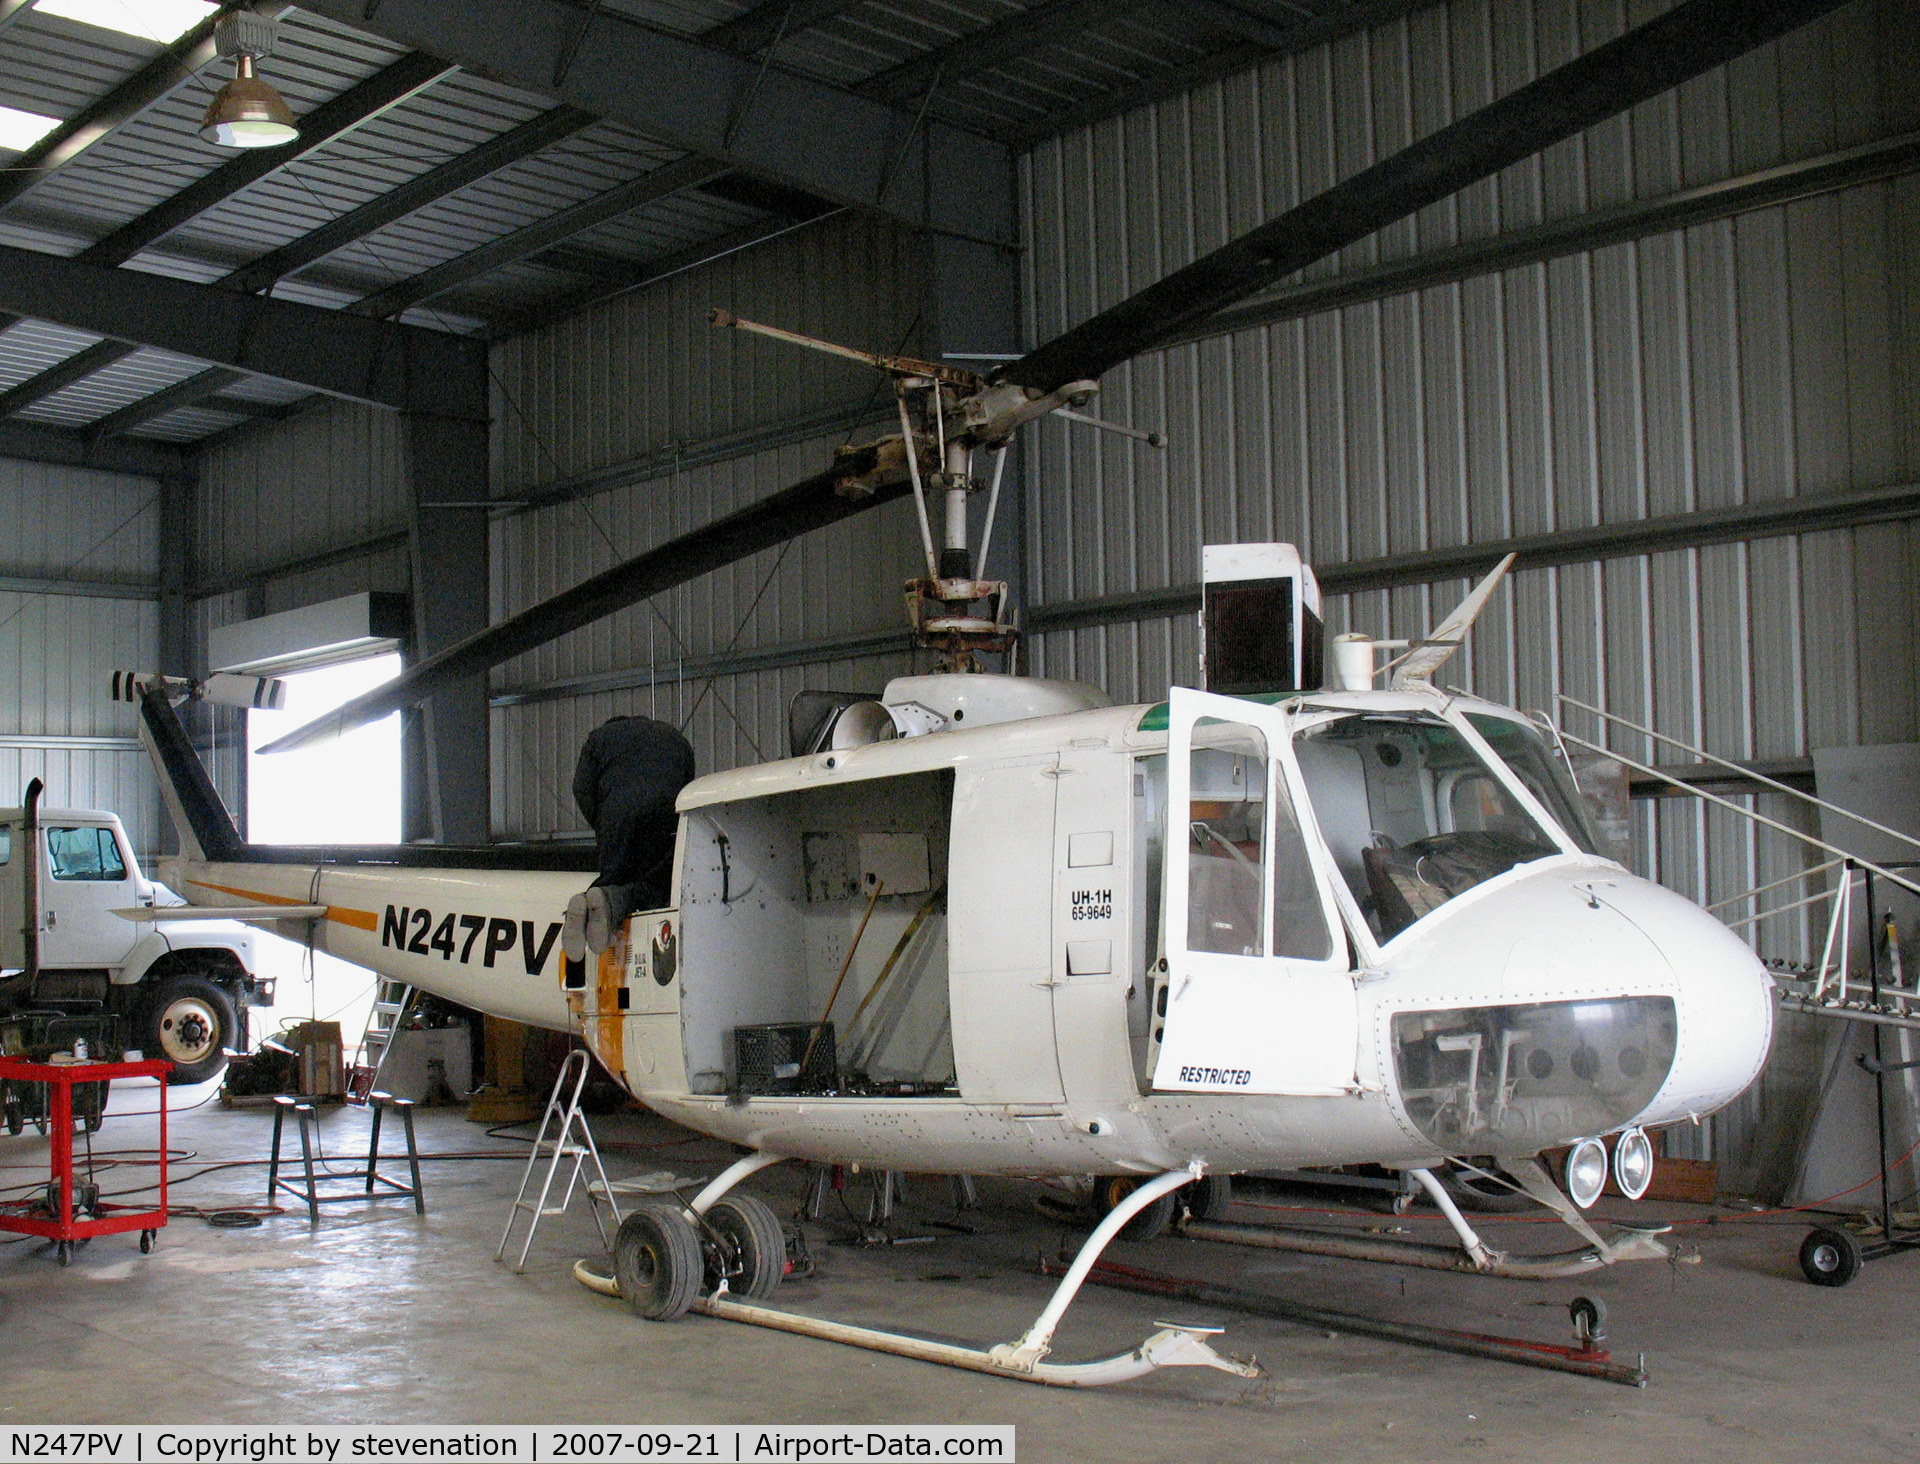 N247PV, 1965 Bell UH-1D Iroquois C/N 4693, Pacific Valley Aviation 1965 Bell UH-1D @ Arbuckle, CA Lone Star Road home base (ex 65-9649) - now in PVA colors